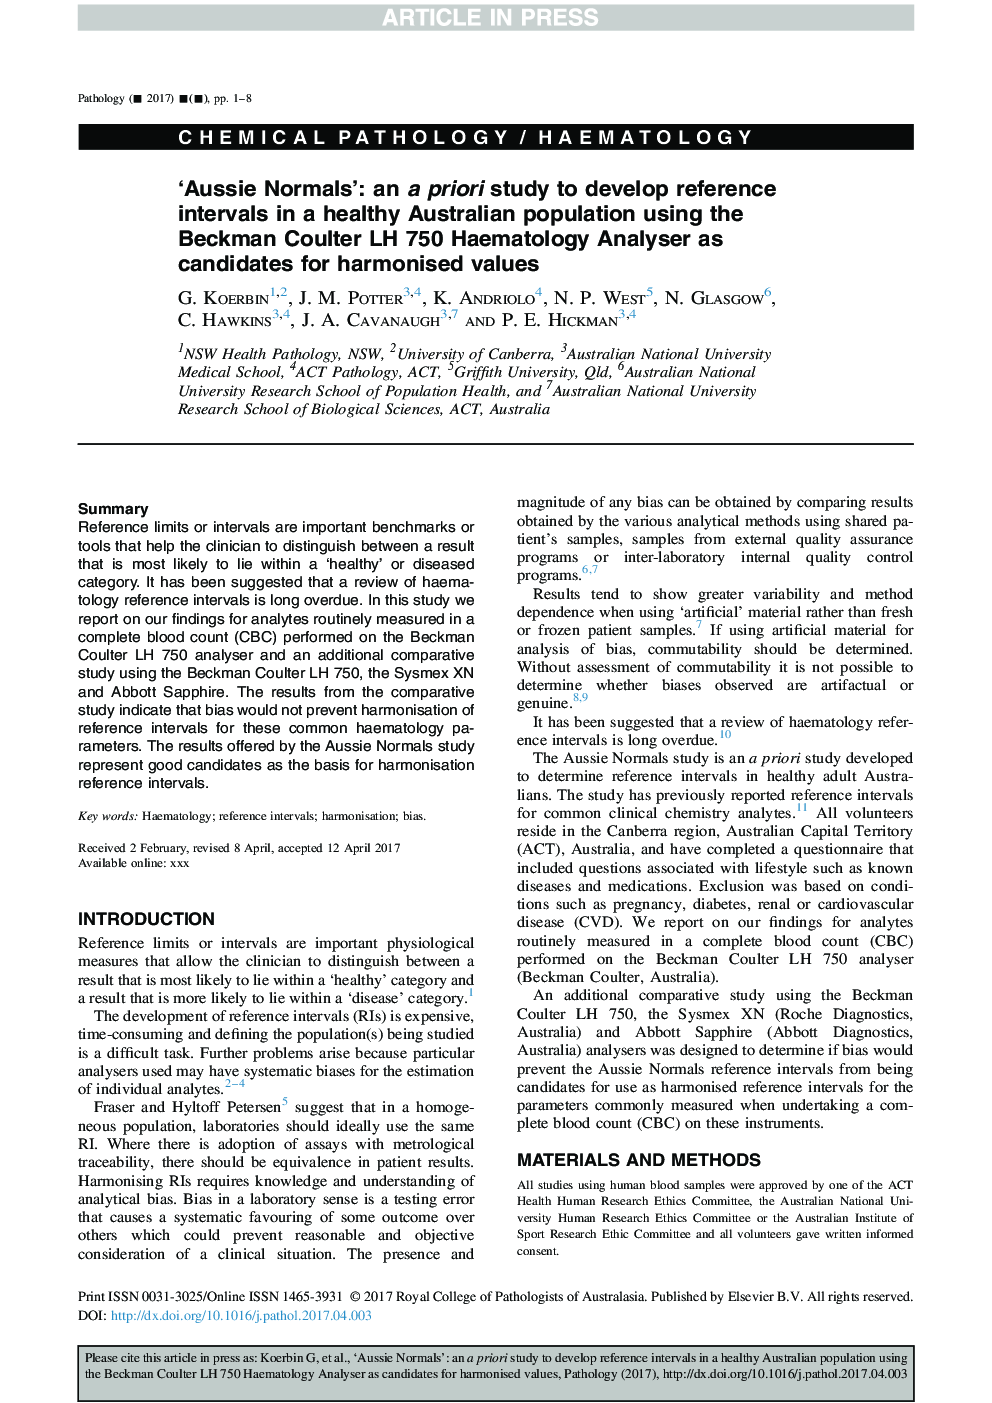 'Aussie Normals': an a priori study to develop reference intervals in a healthy Australian population using the Beckman Coulter LH 750 Haematology Analyser as candidates for harmonised values